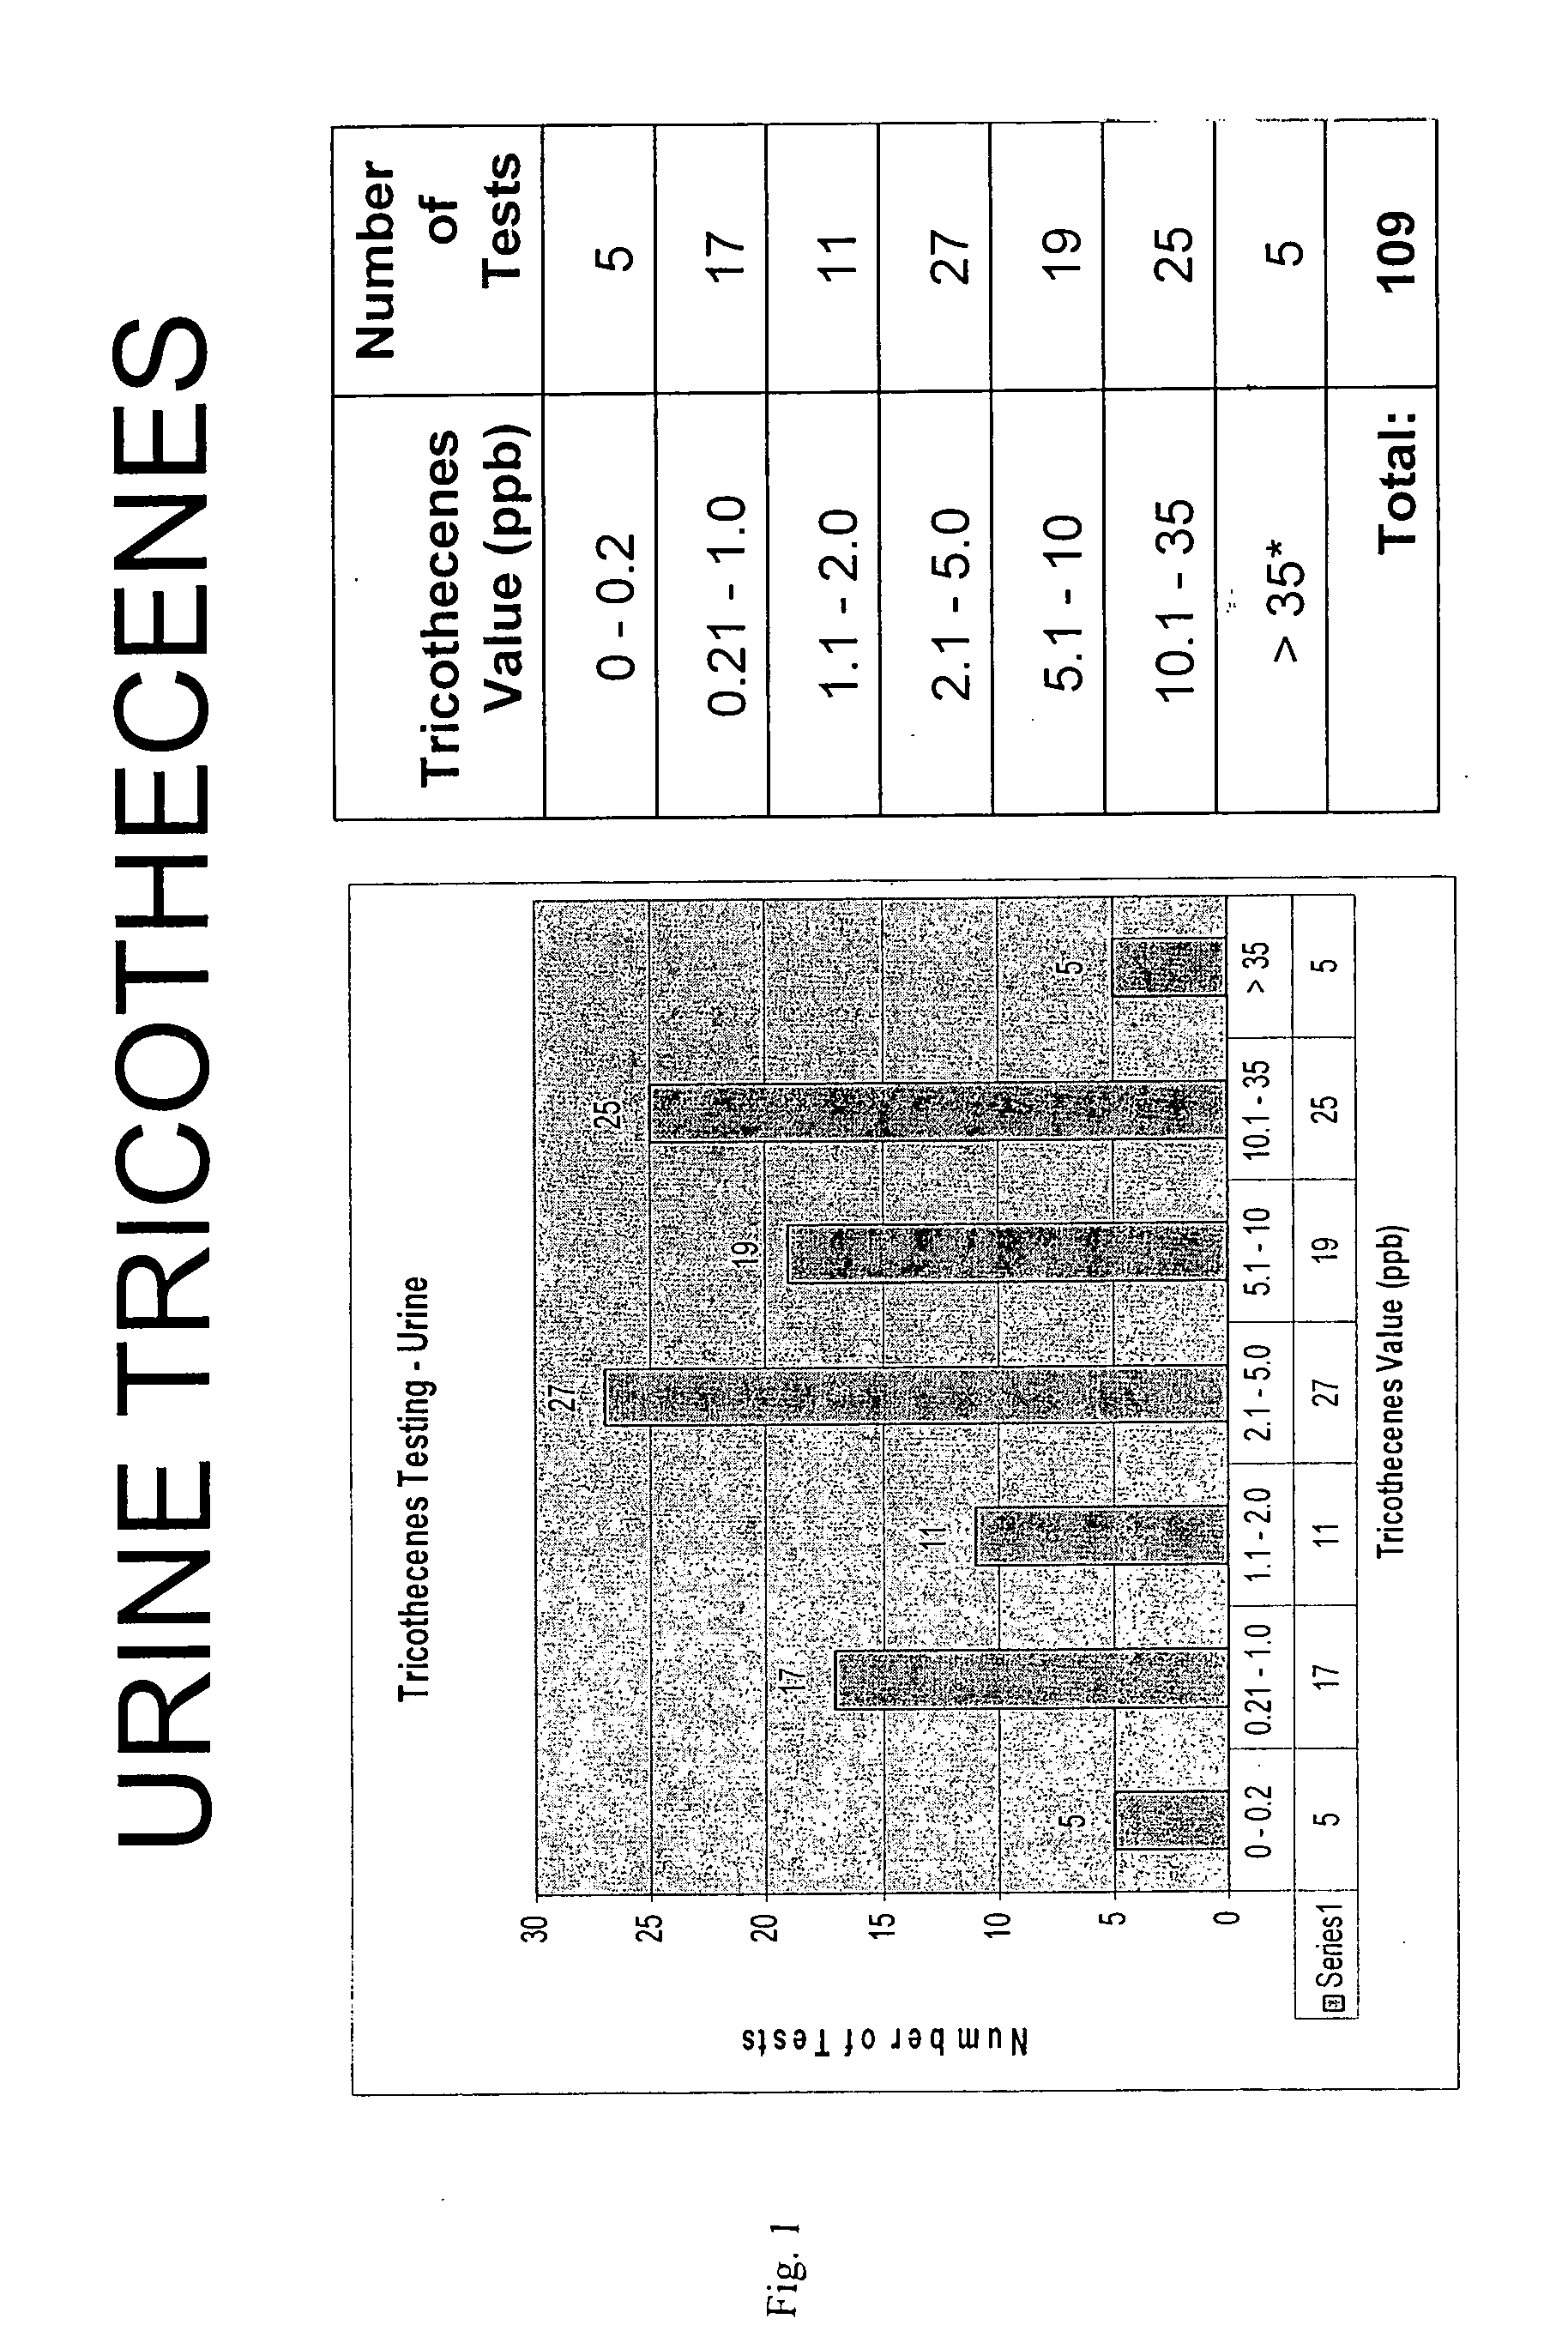 Methods and compositions for detecting fungi and mycotoxins